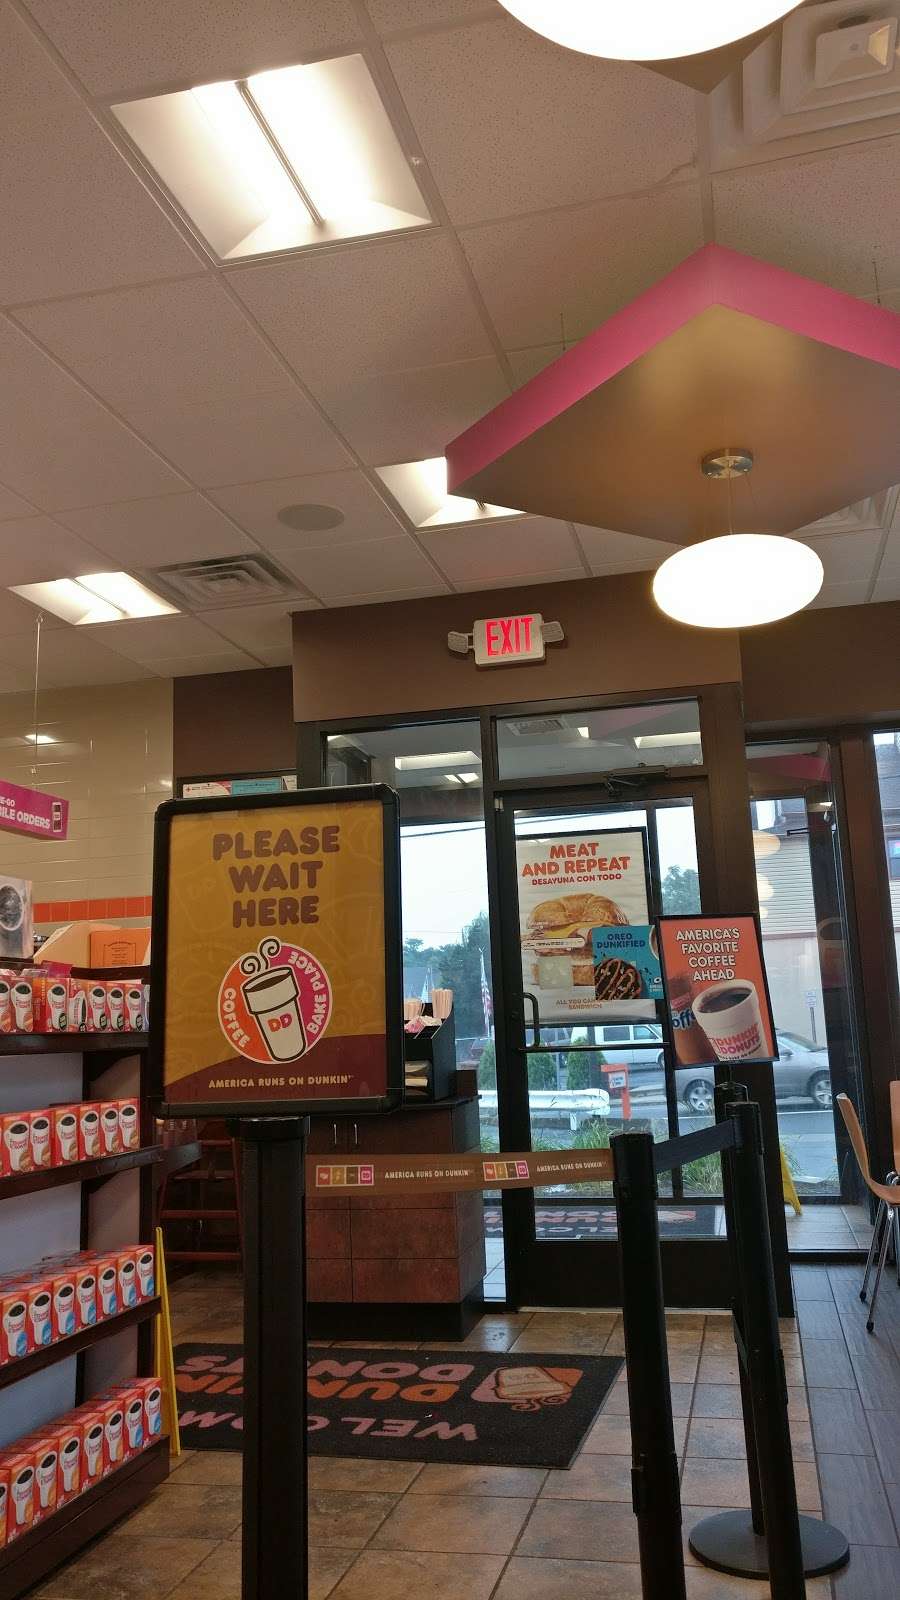 Dunkin Donuts - cafe  | Photo 5 of 10 | Address: 93 Valley Rd, Clifton, NJ 07013, USA | Phone: (973) 278-1574